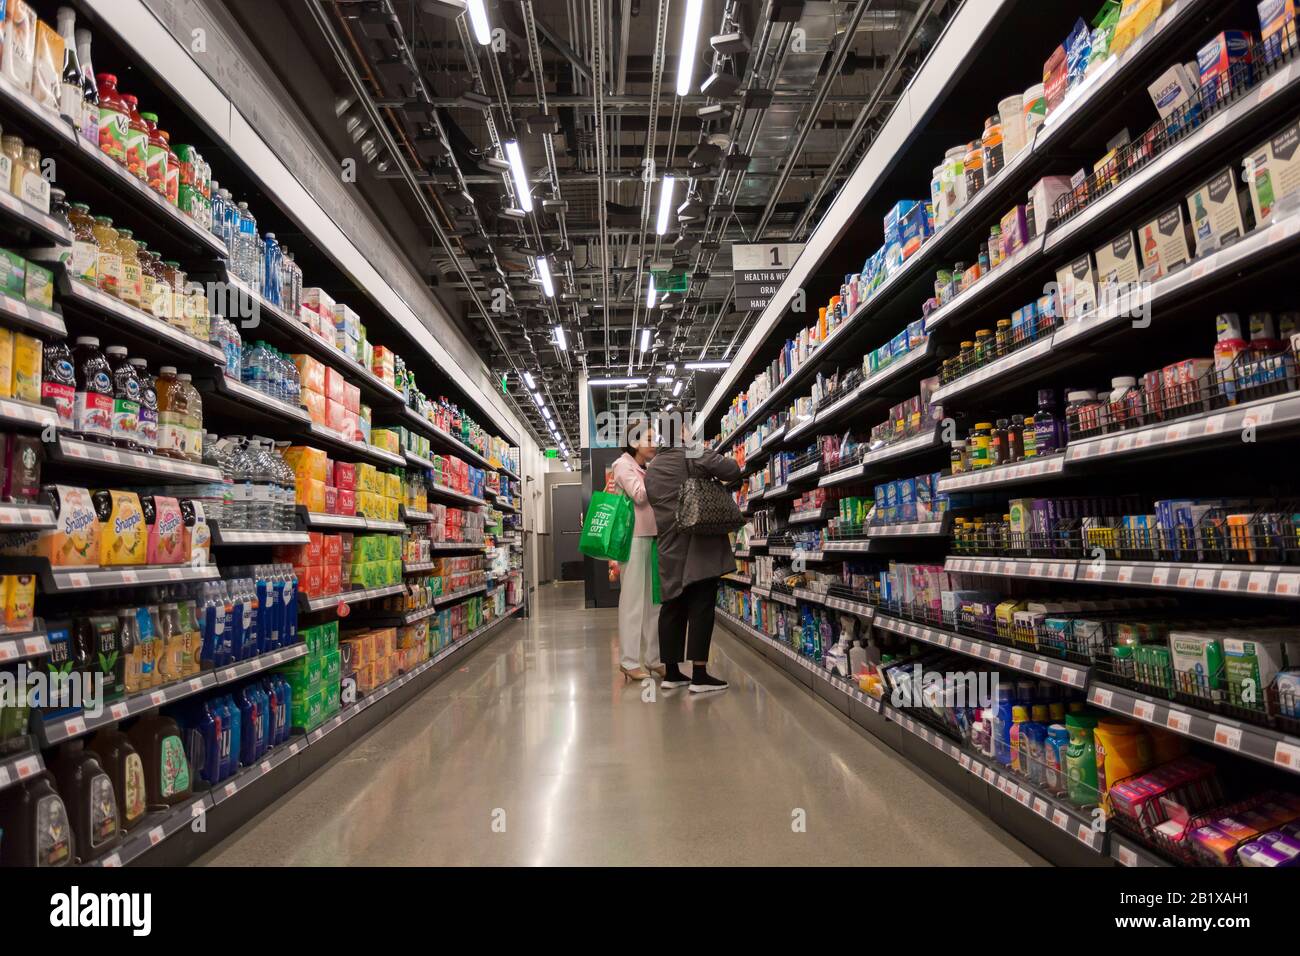 Customers shop at Amazon Go Grocery on February 27, 2020. The tech  company's first full-size cashierless supermarket opened in Seattle's  Capitol Hill neighborhood earlier in the week. Customers scan an Amazon Go